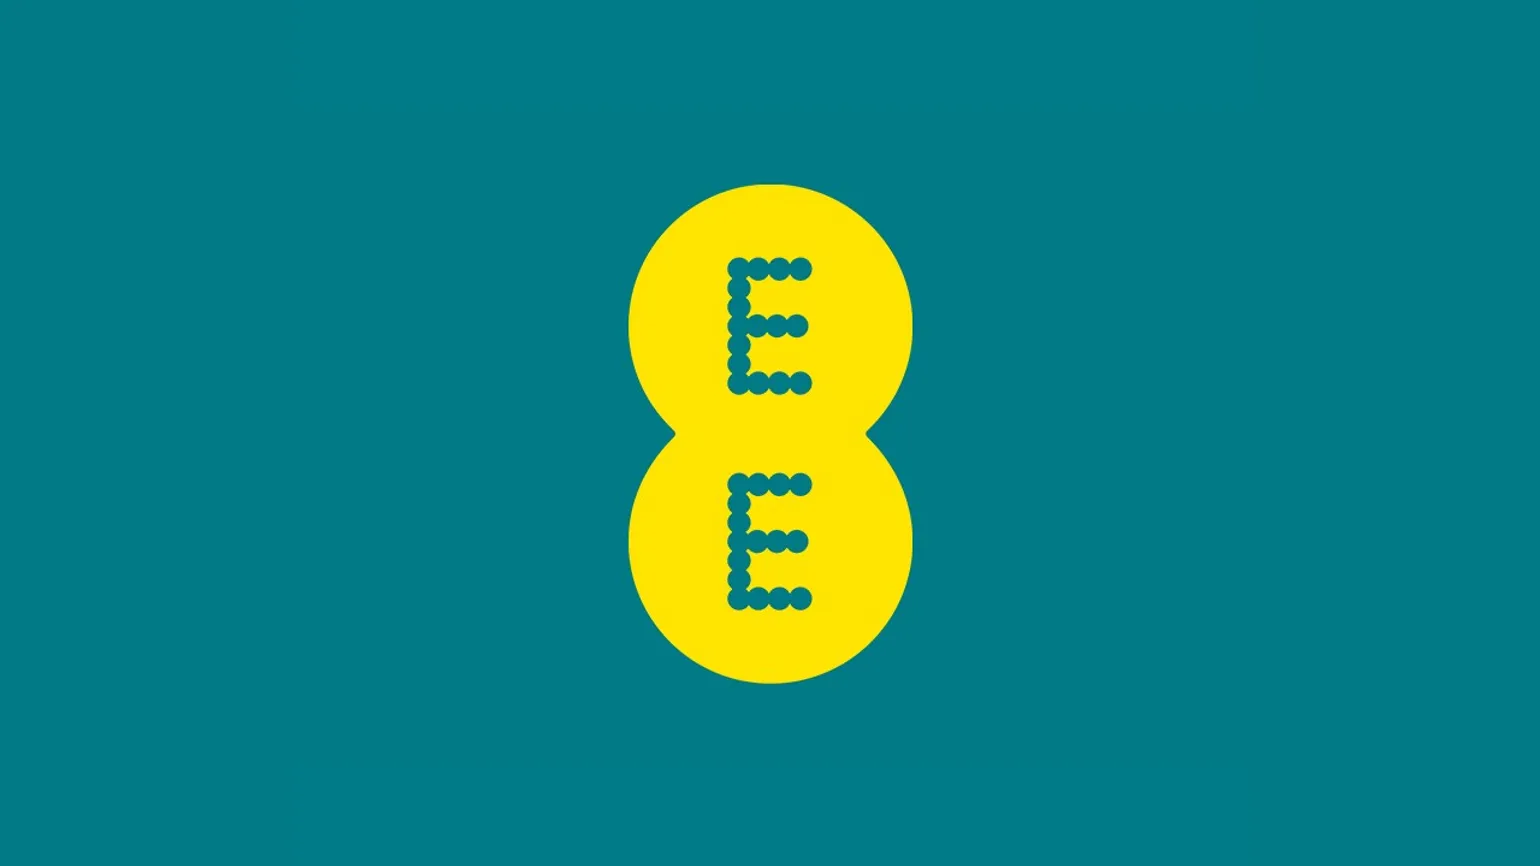 EE pulls out of comparison websites